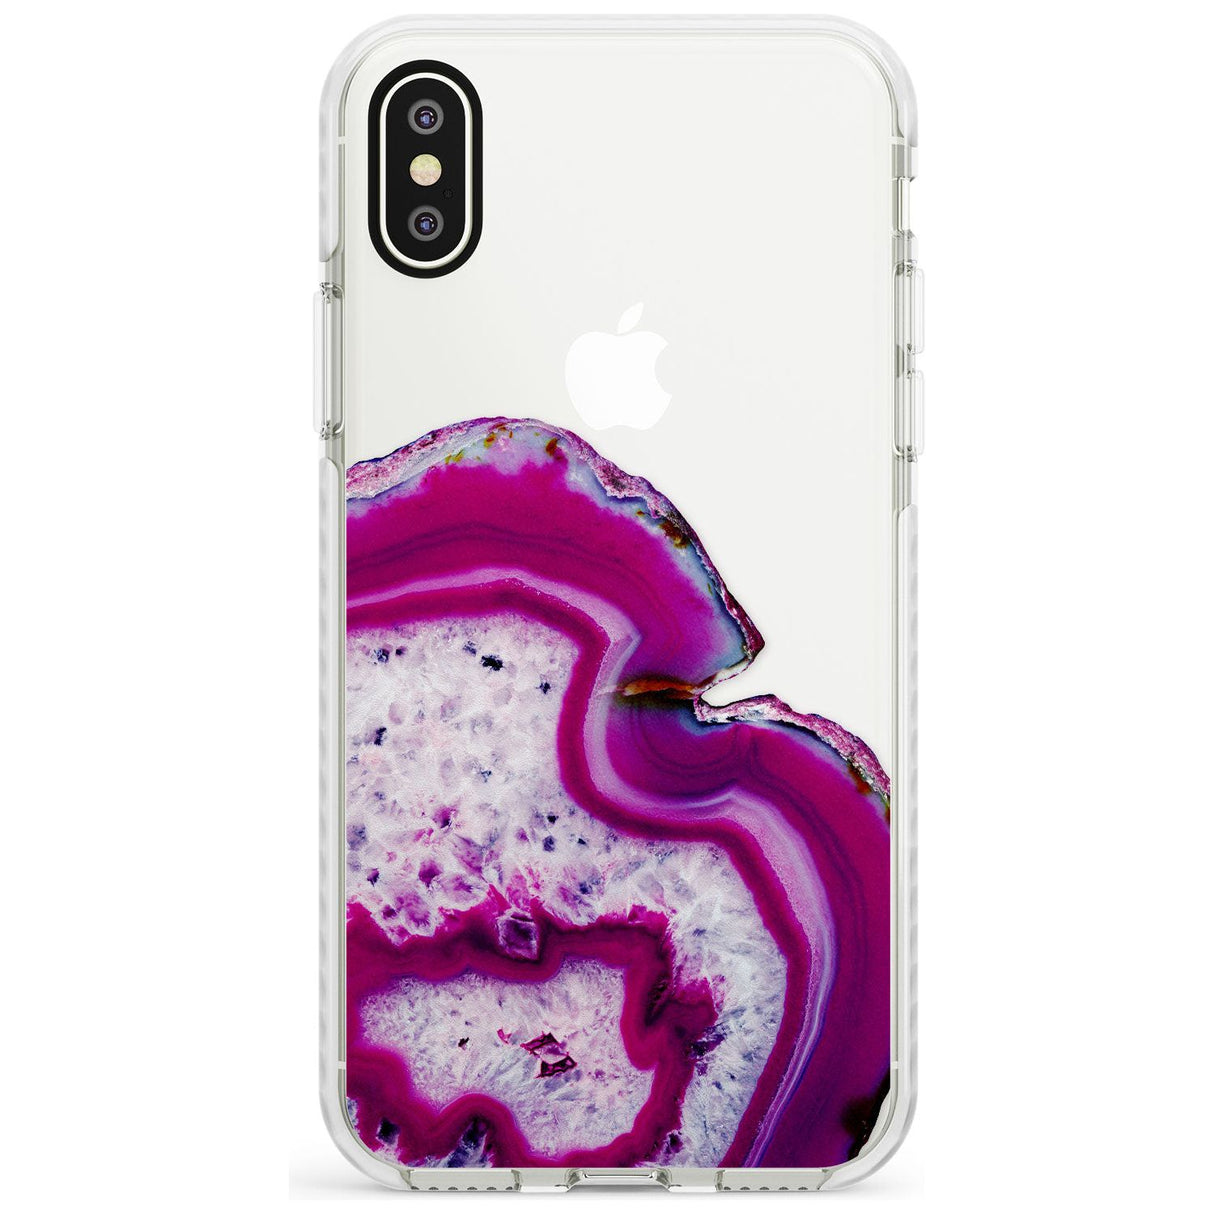 Violet & White Swirl Agate Crystal Clear Design Impact Phone Case for iPhone X XS Max XR